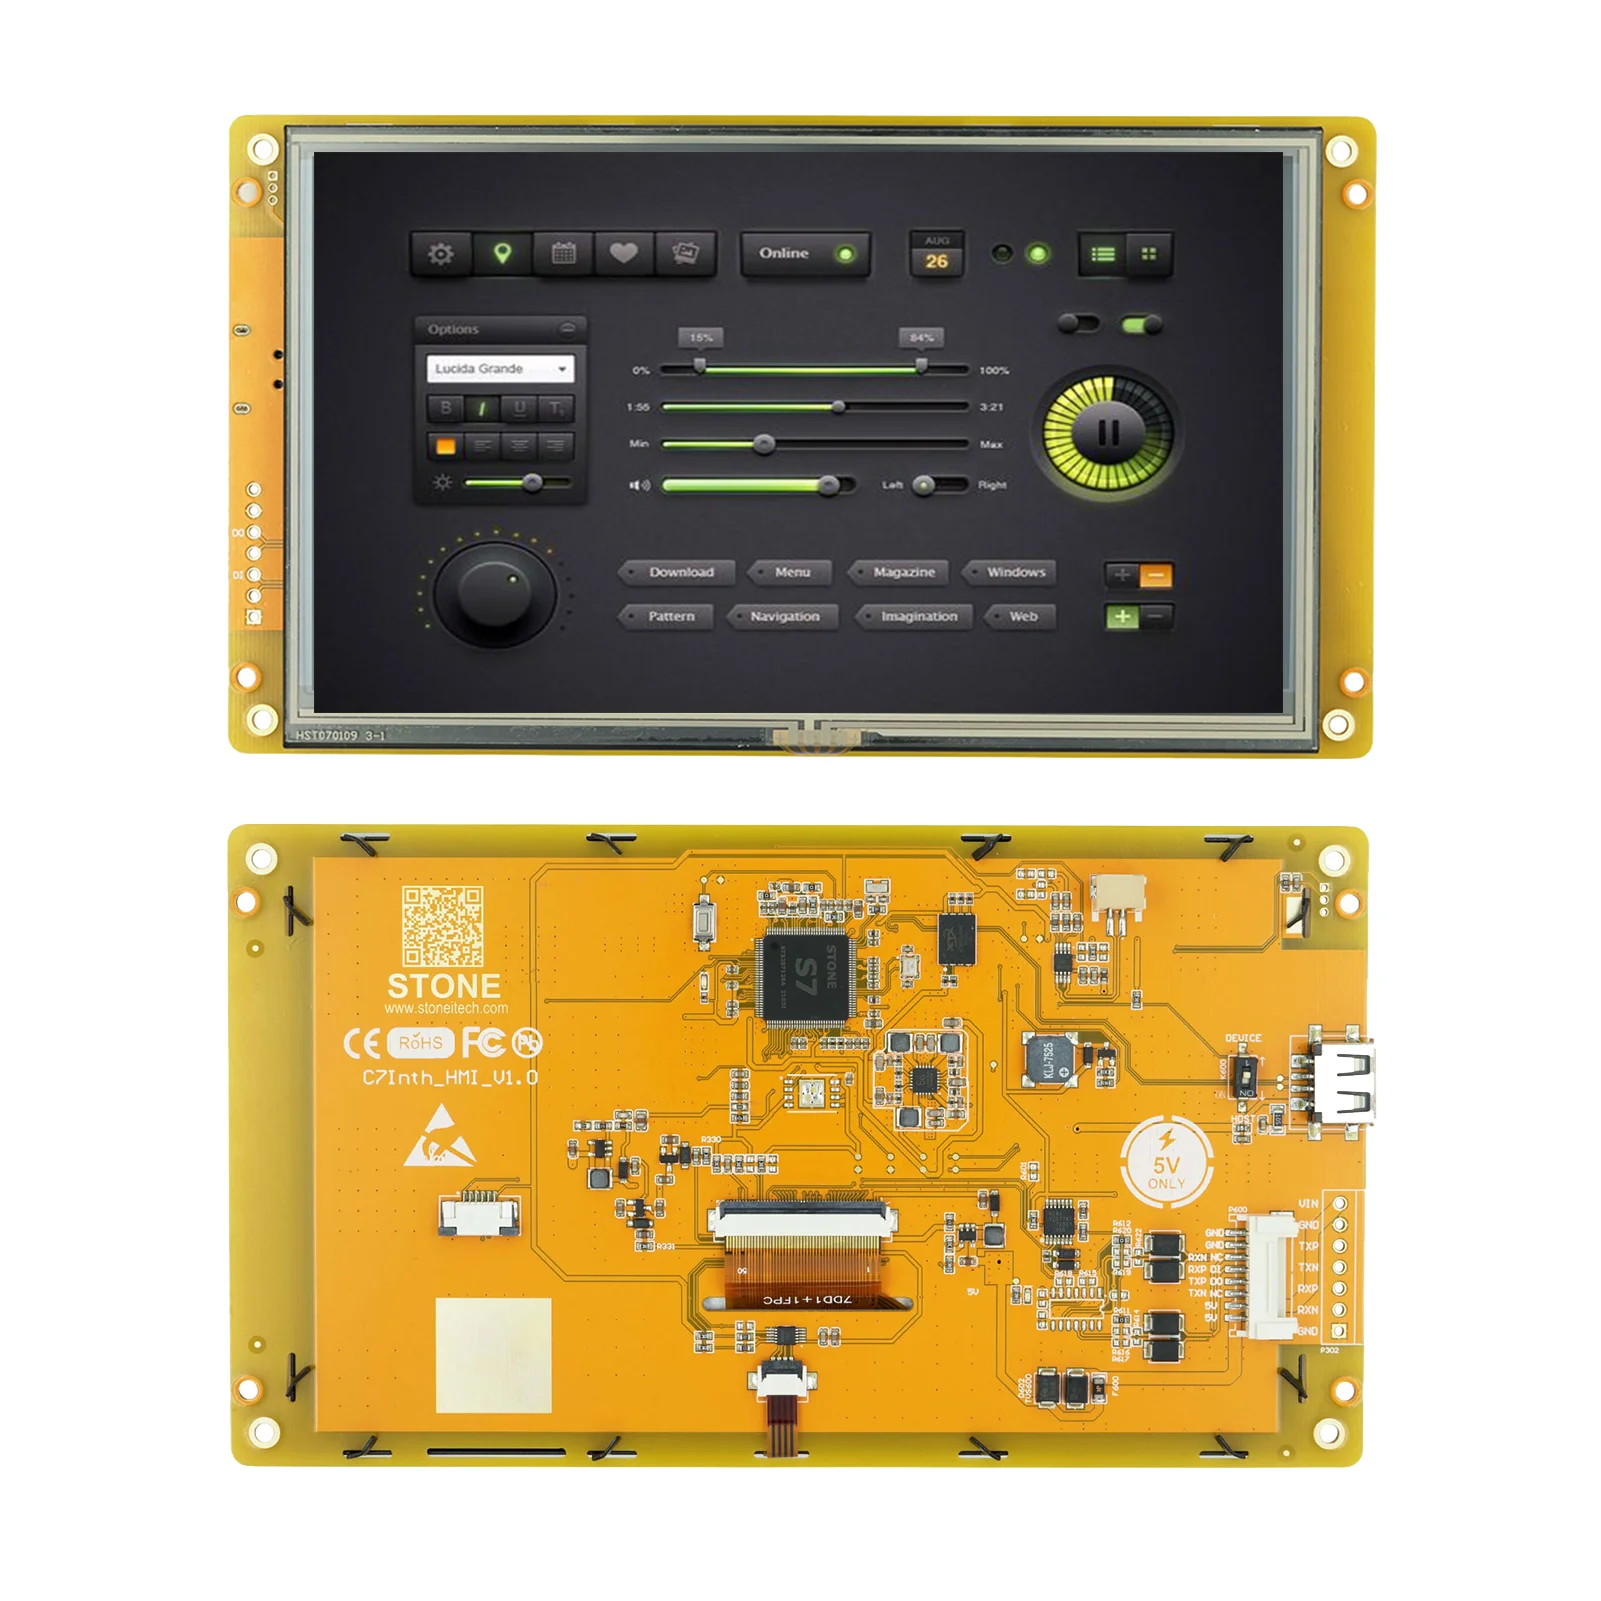 7 Inch Industrial LCD Screen Support a Variety of Gesture Touch with Sensitive Response and Stable Touch